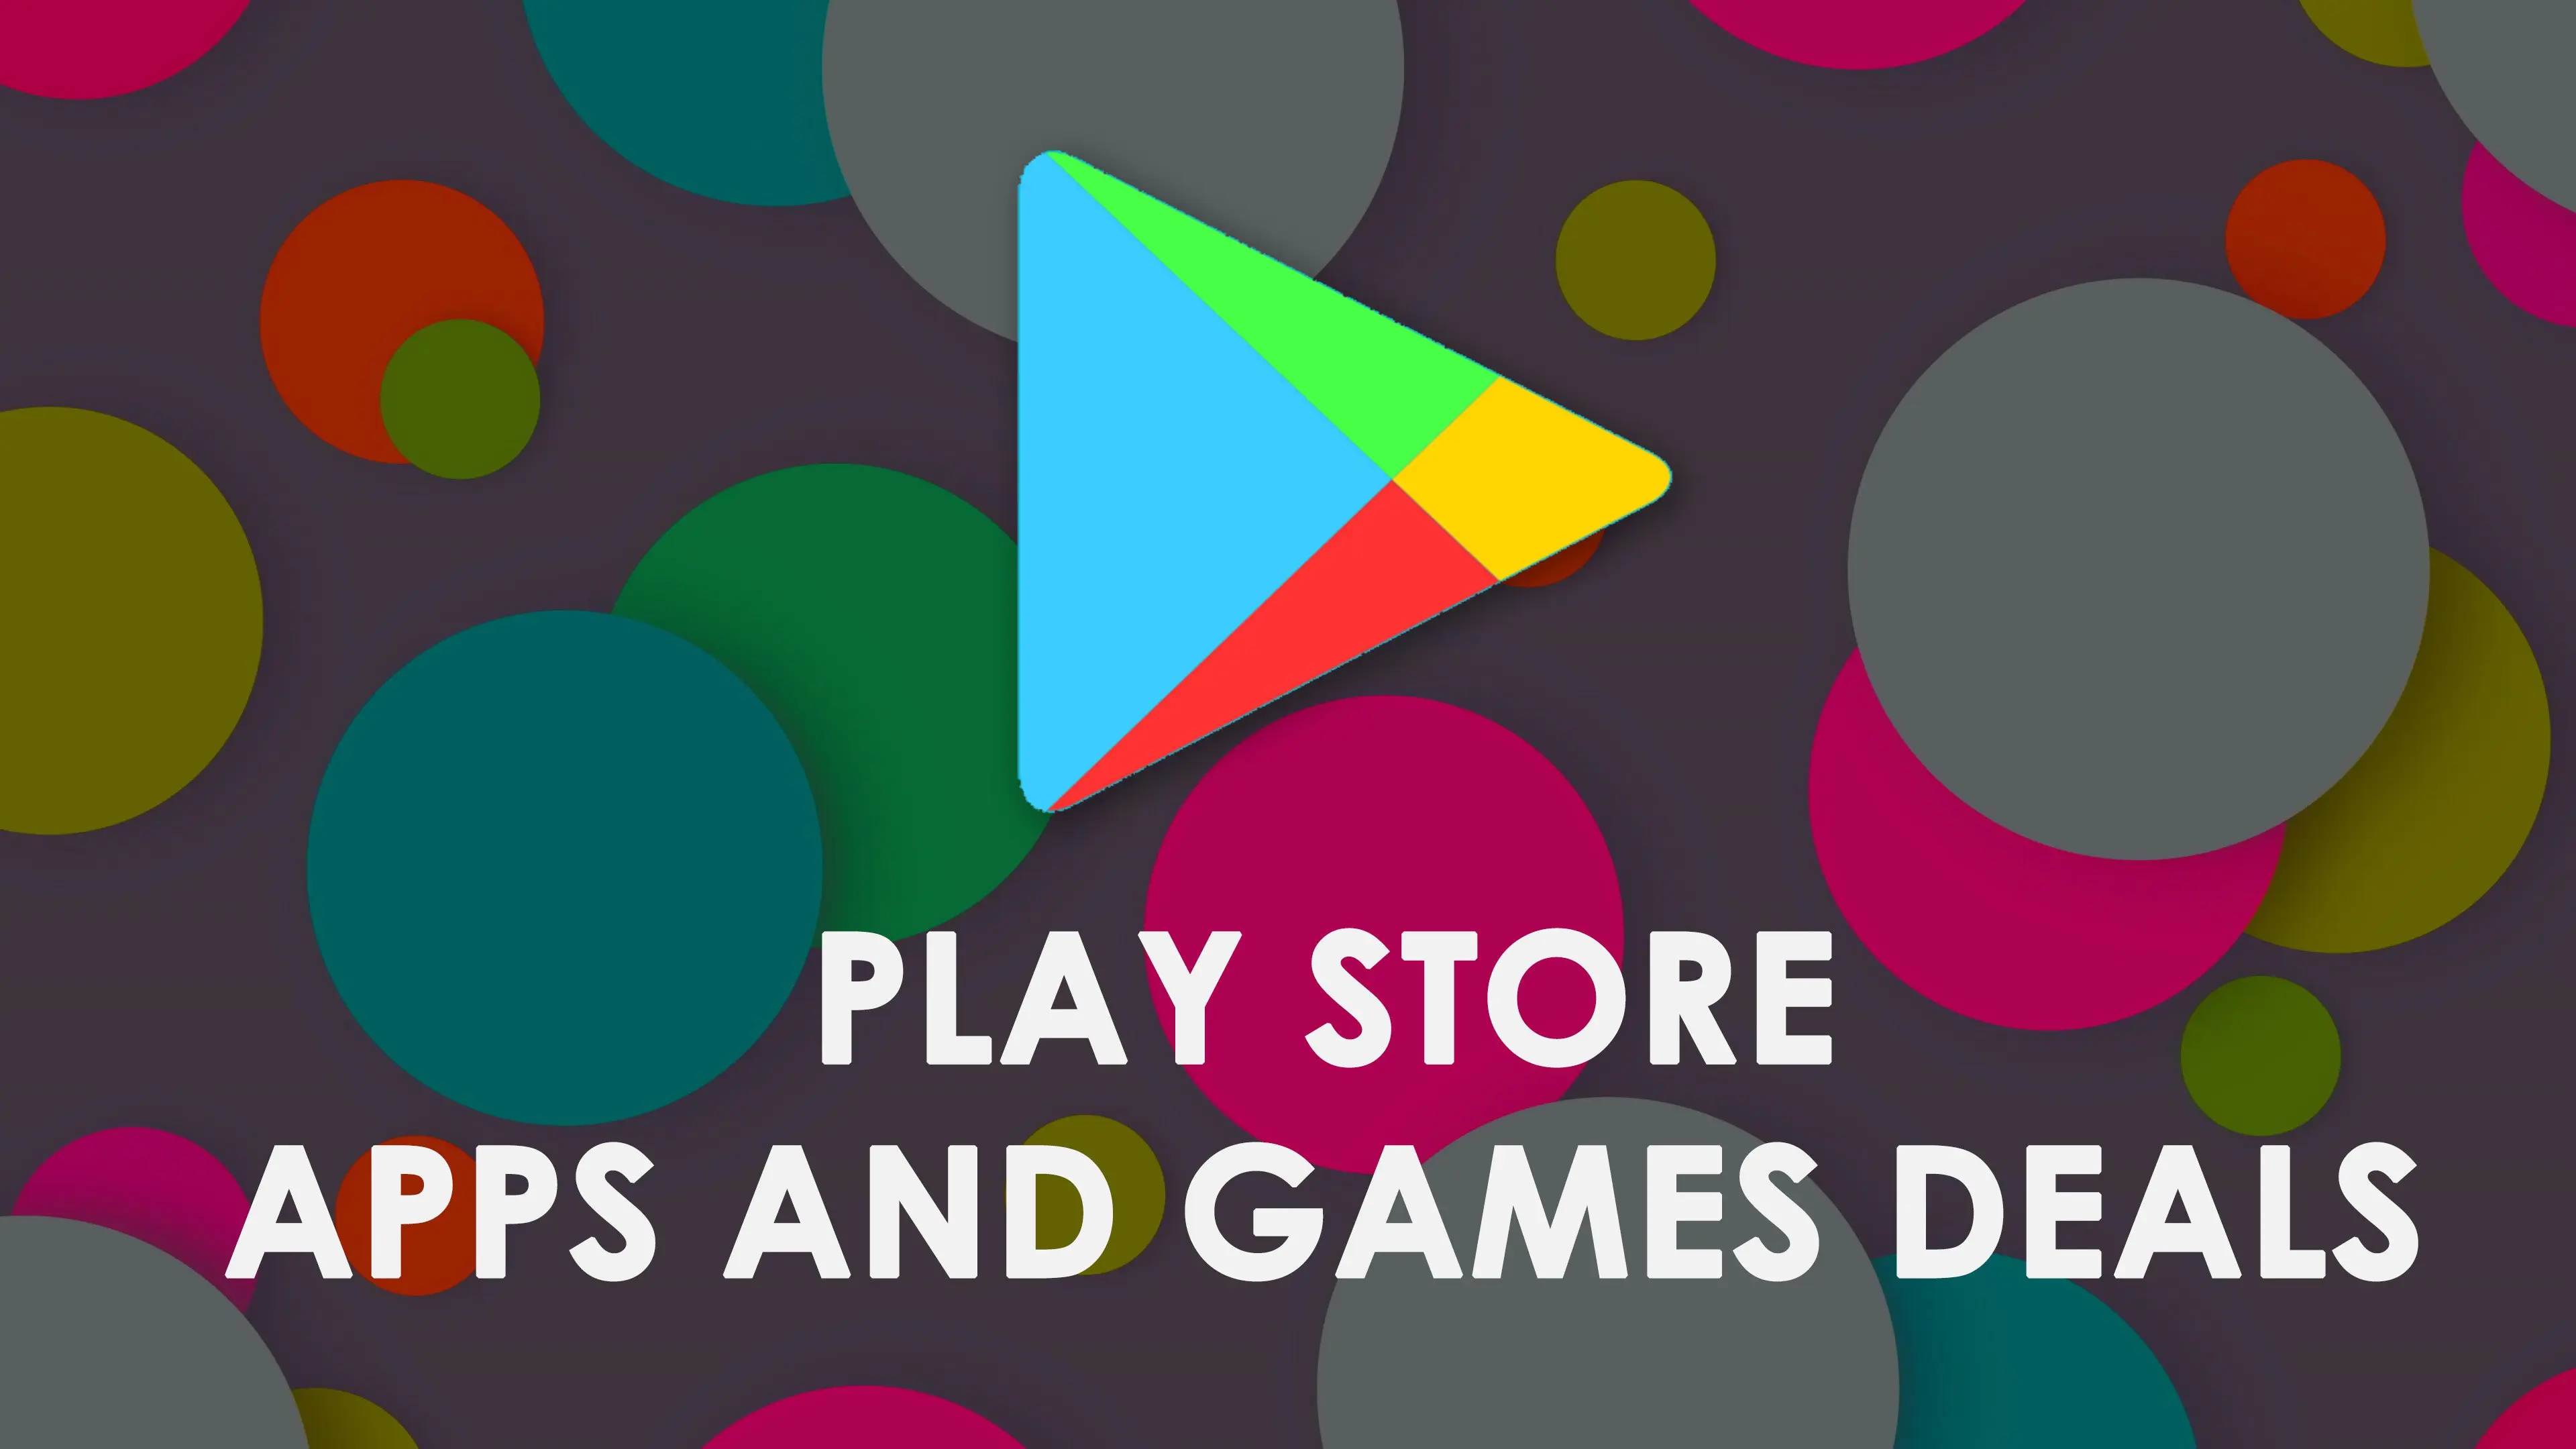 Apps and games deals on play store